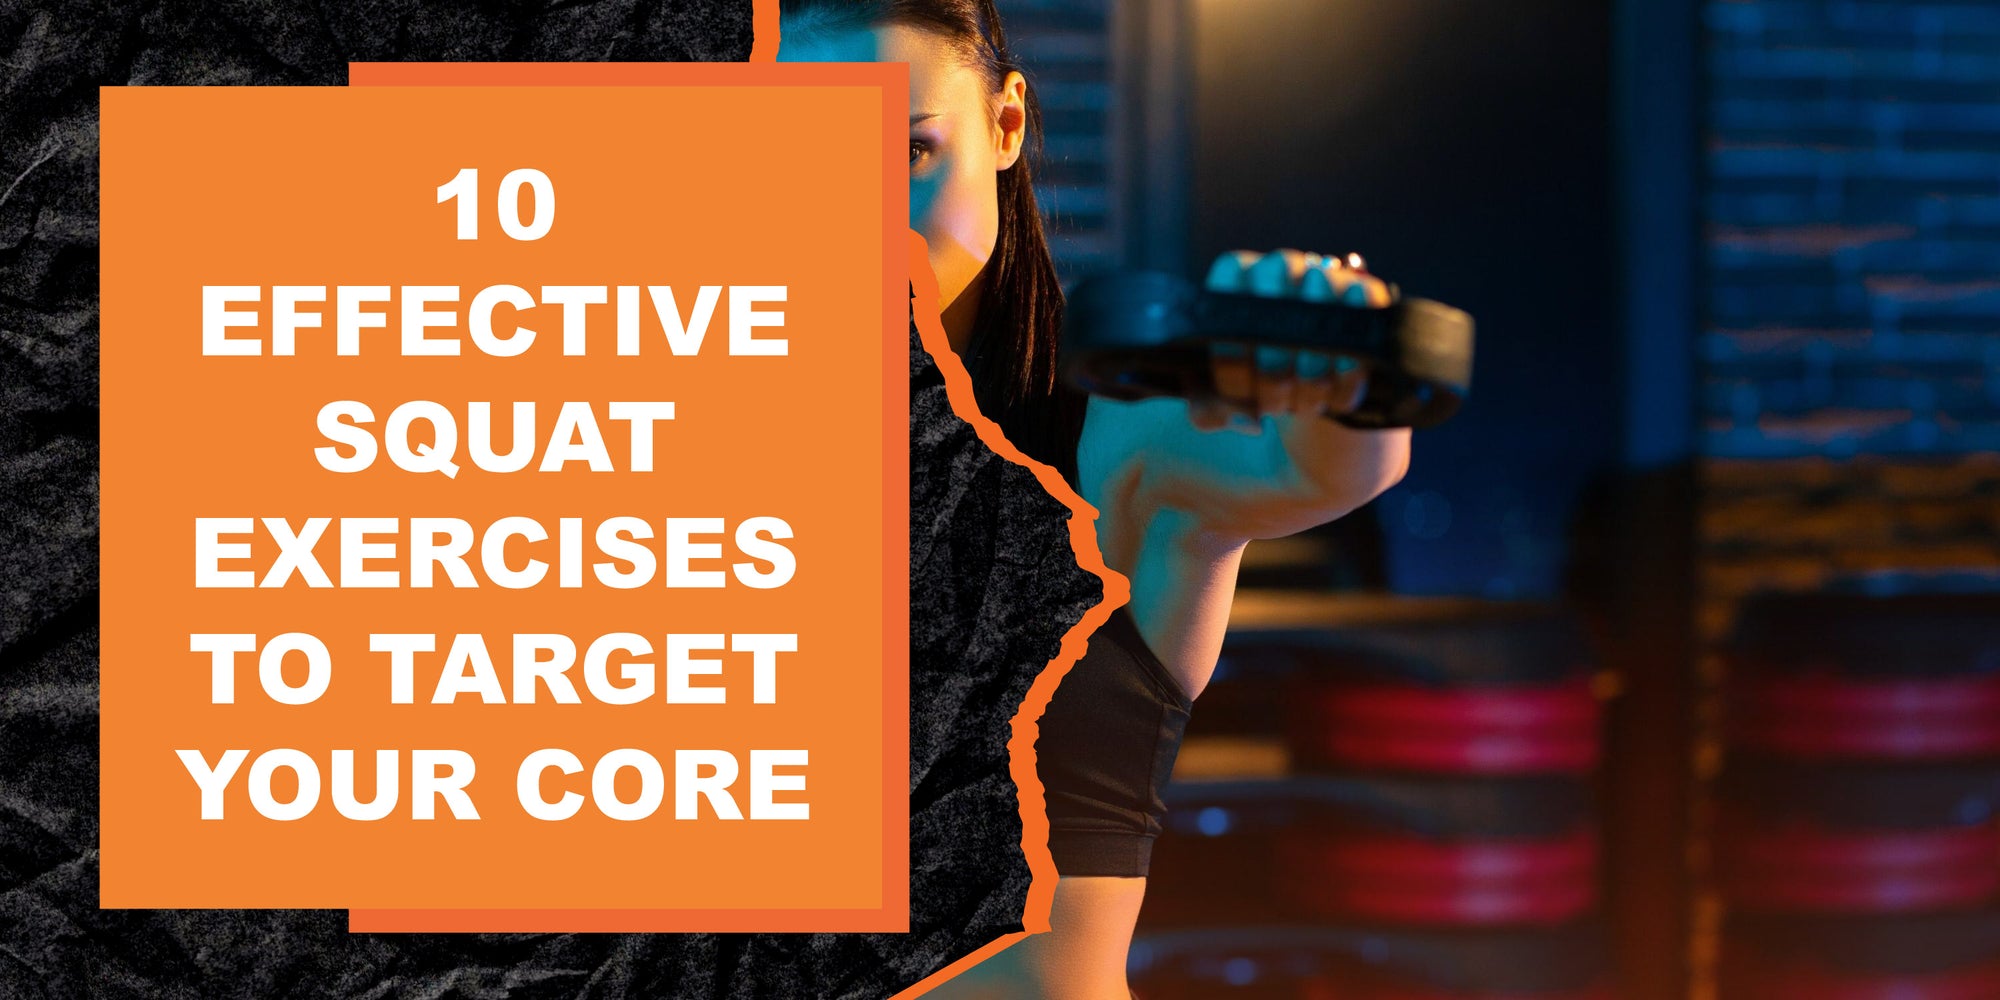 10 Effective Squat Exercises To Target Your Core